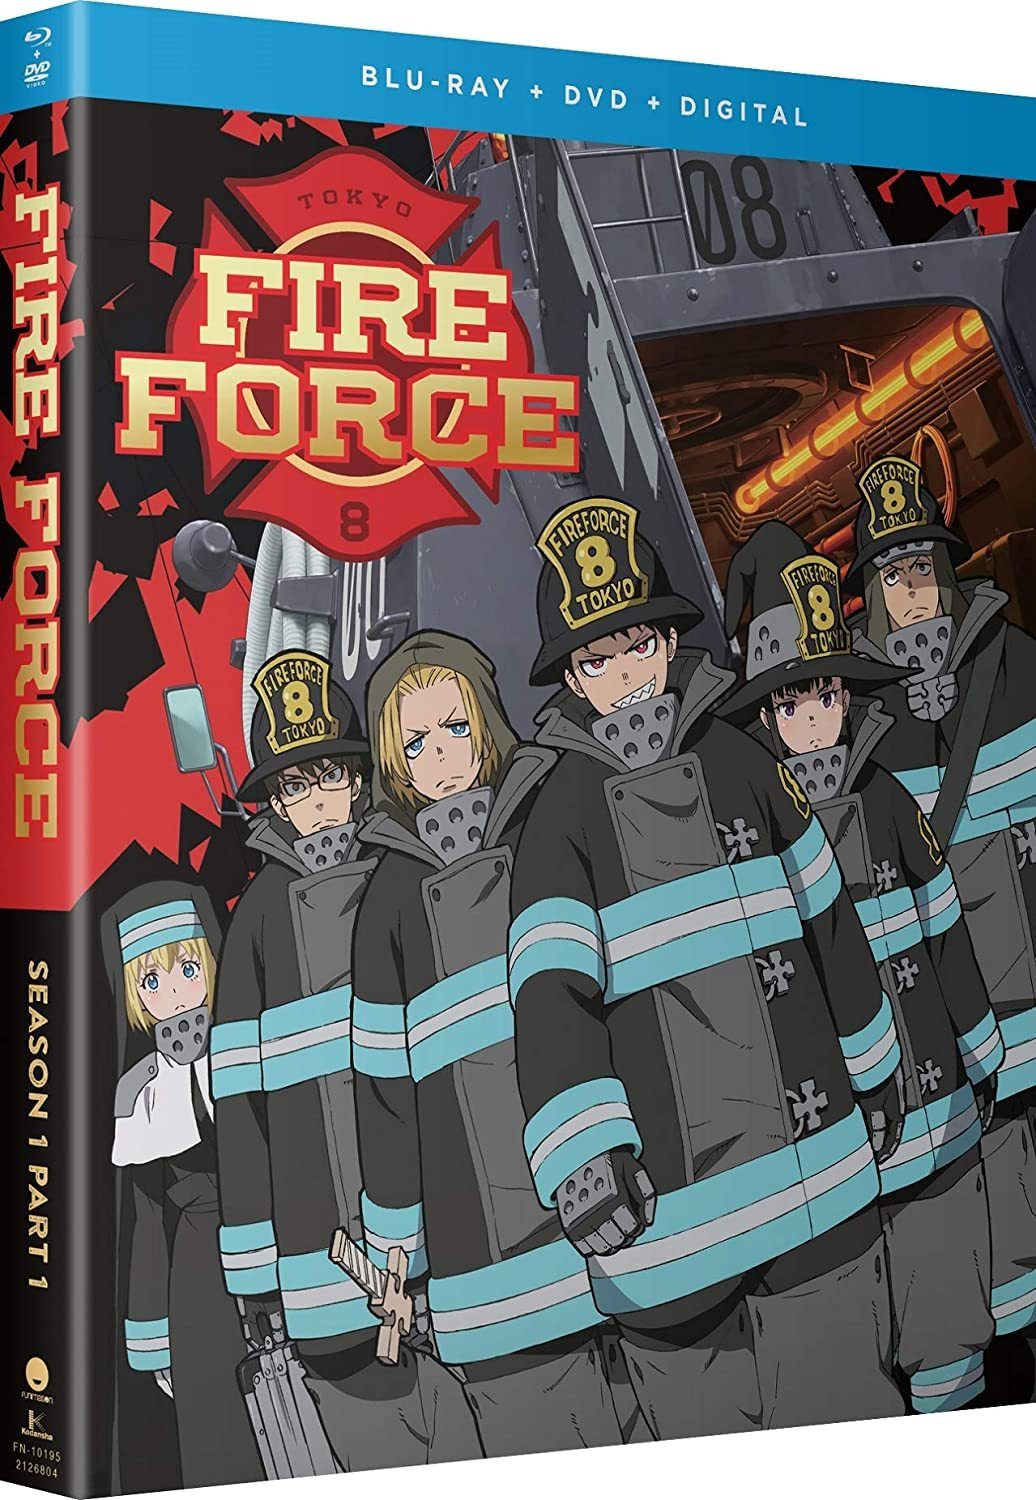 Fire Force - Season 1 Part 1 - Blu-ray + DVD image count 0